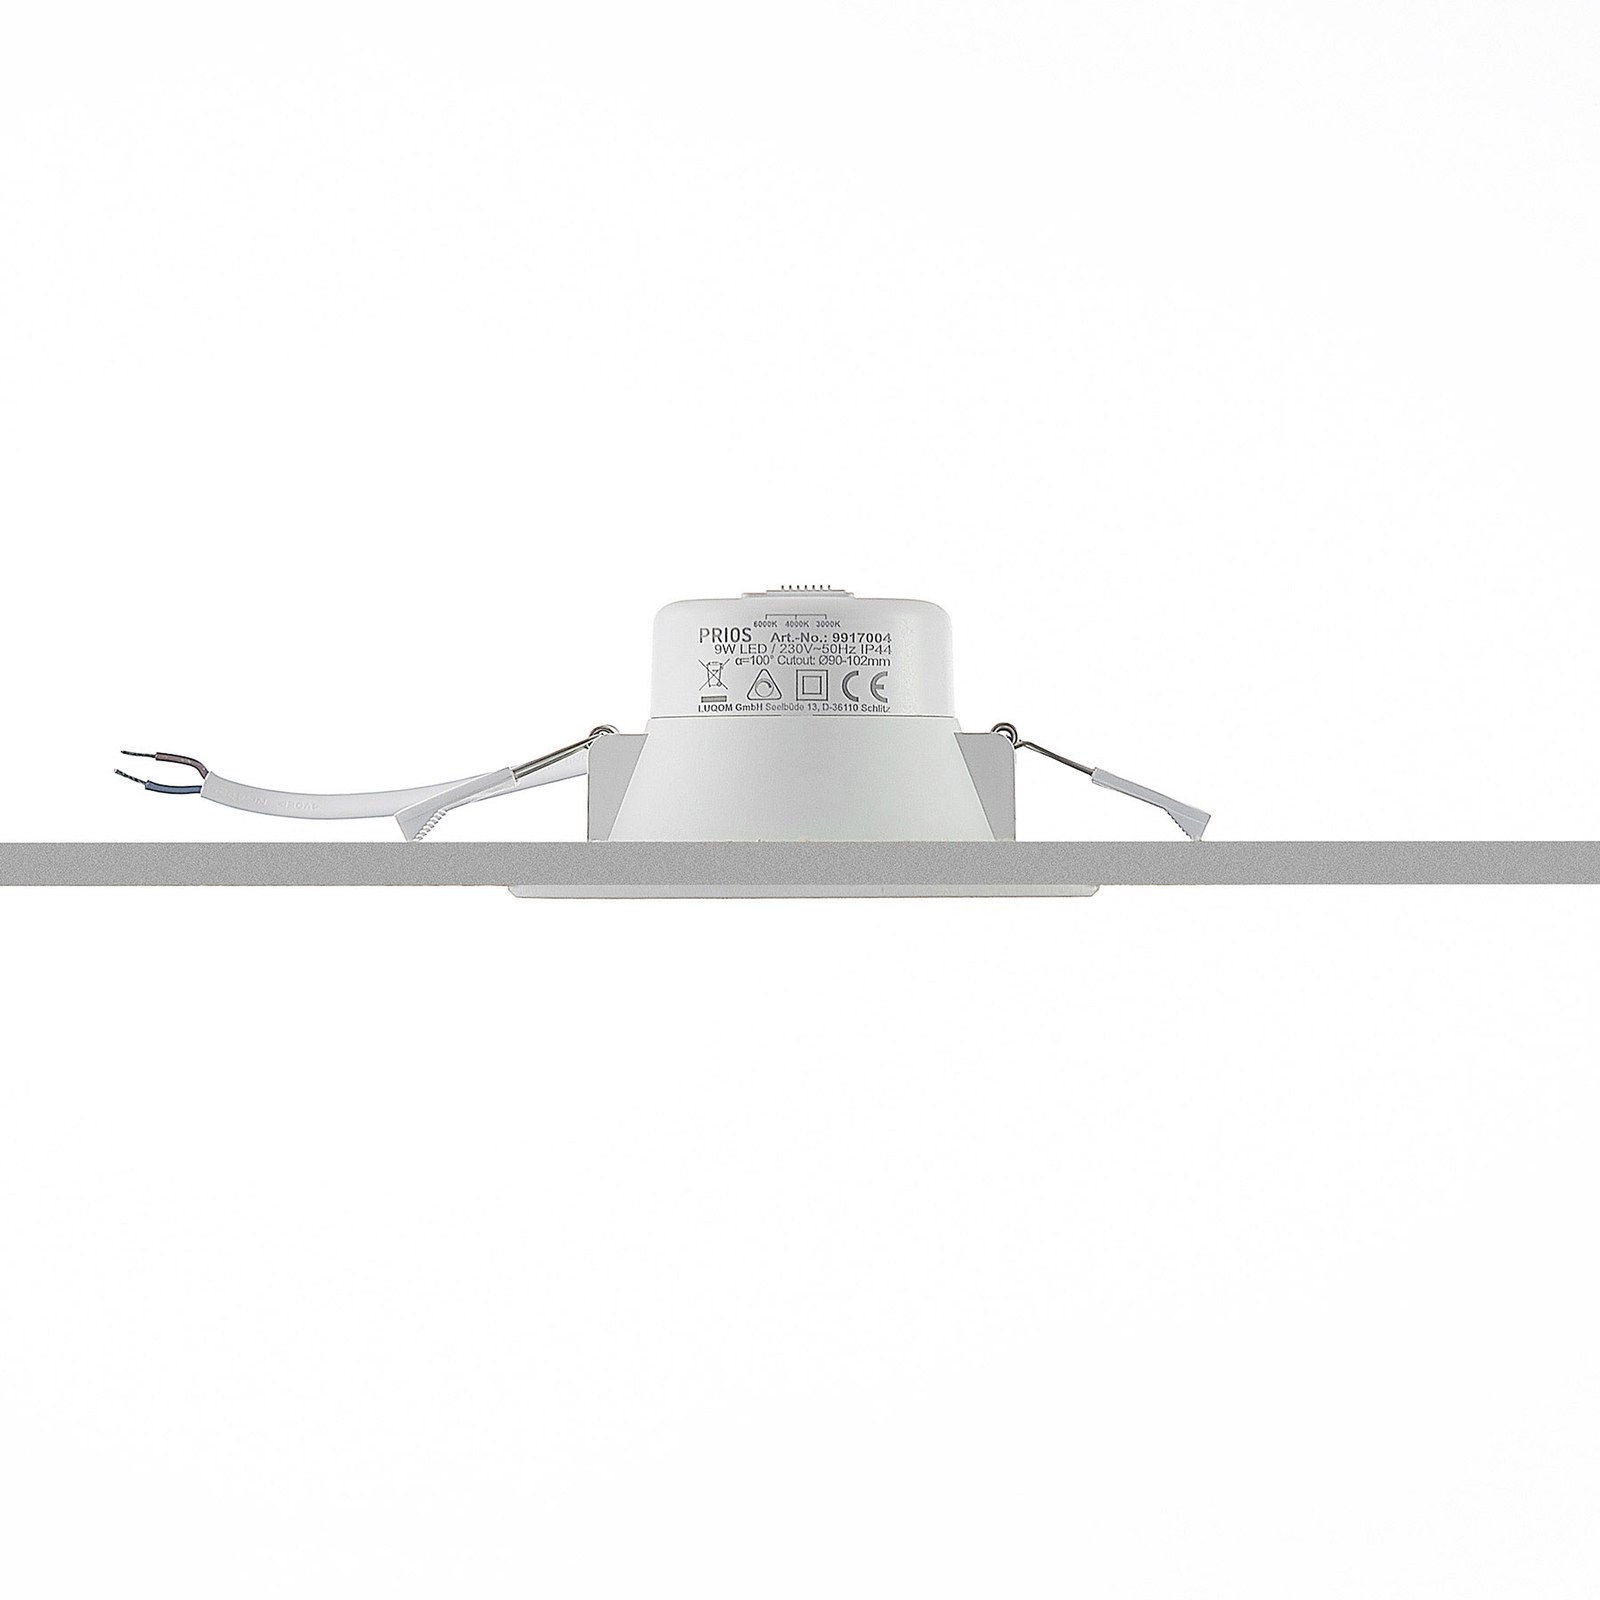 Prios LED recessed light Rida, 11.5cm, 9W, 3pcs, CCT, dimmable